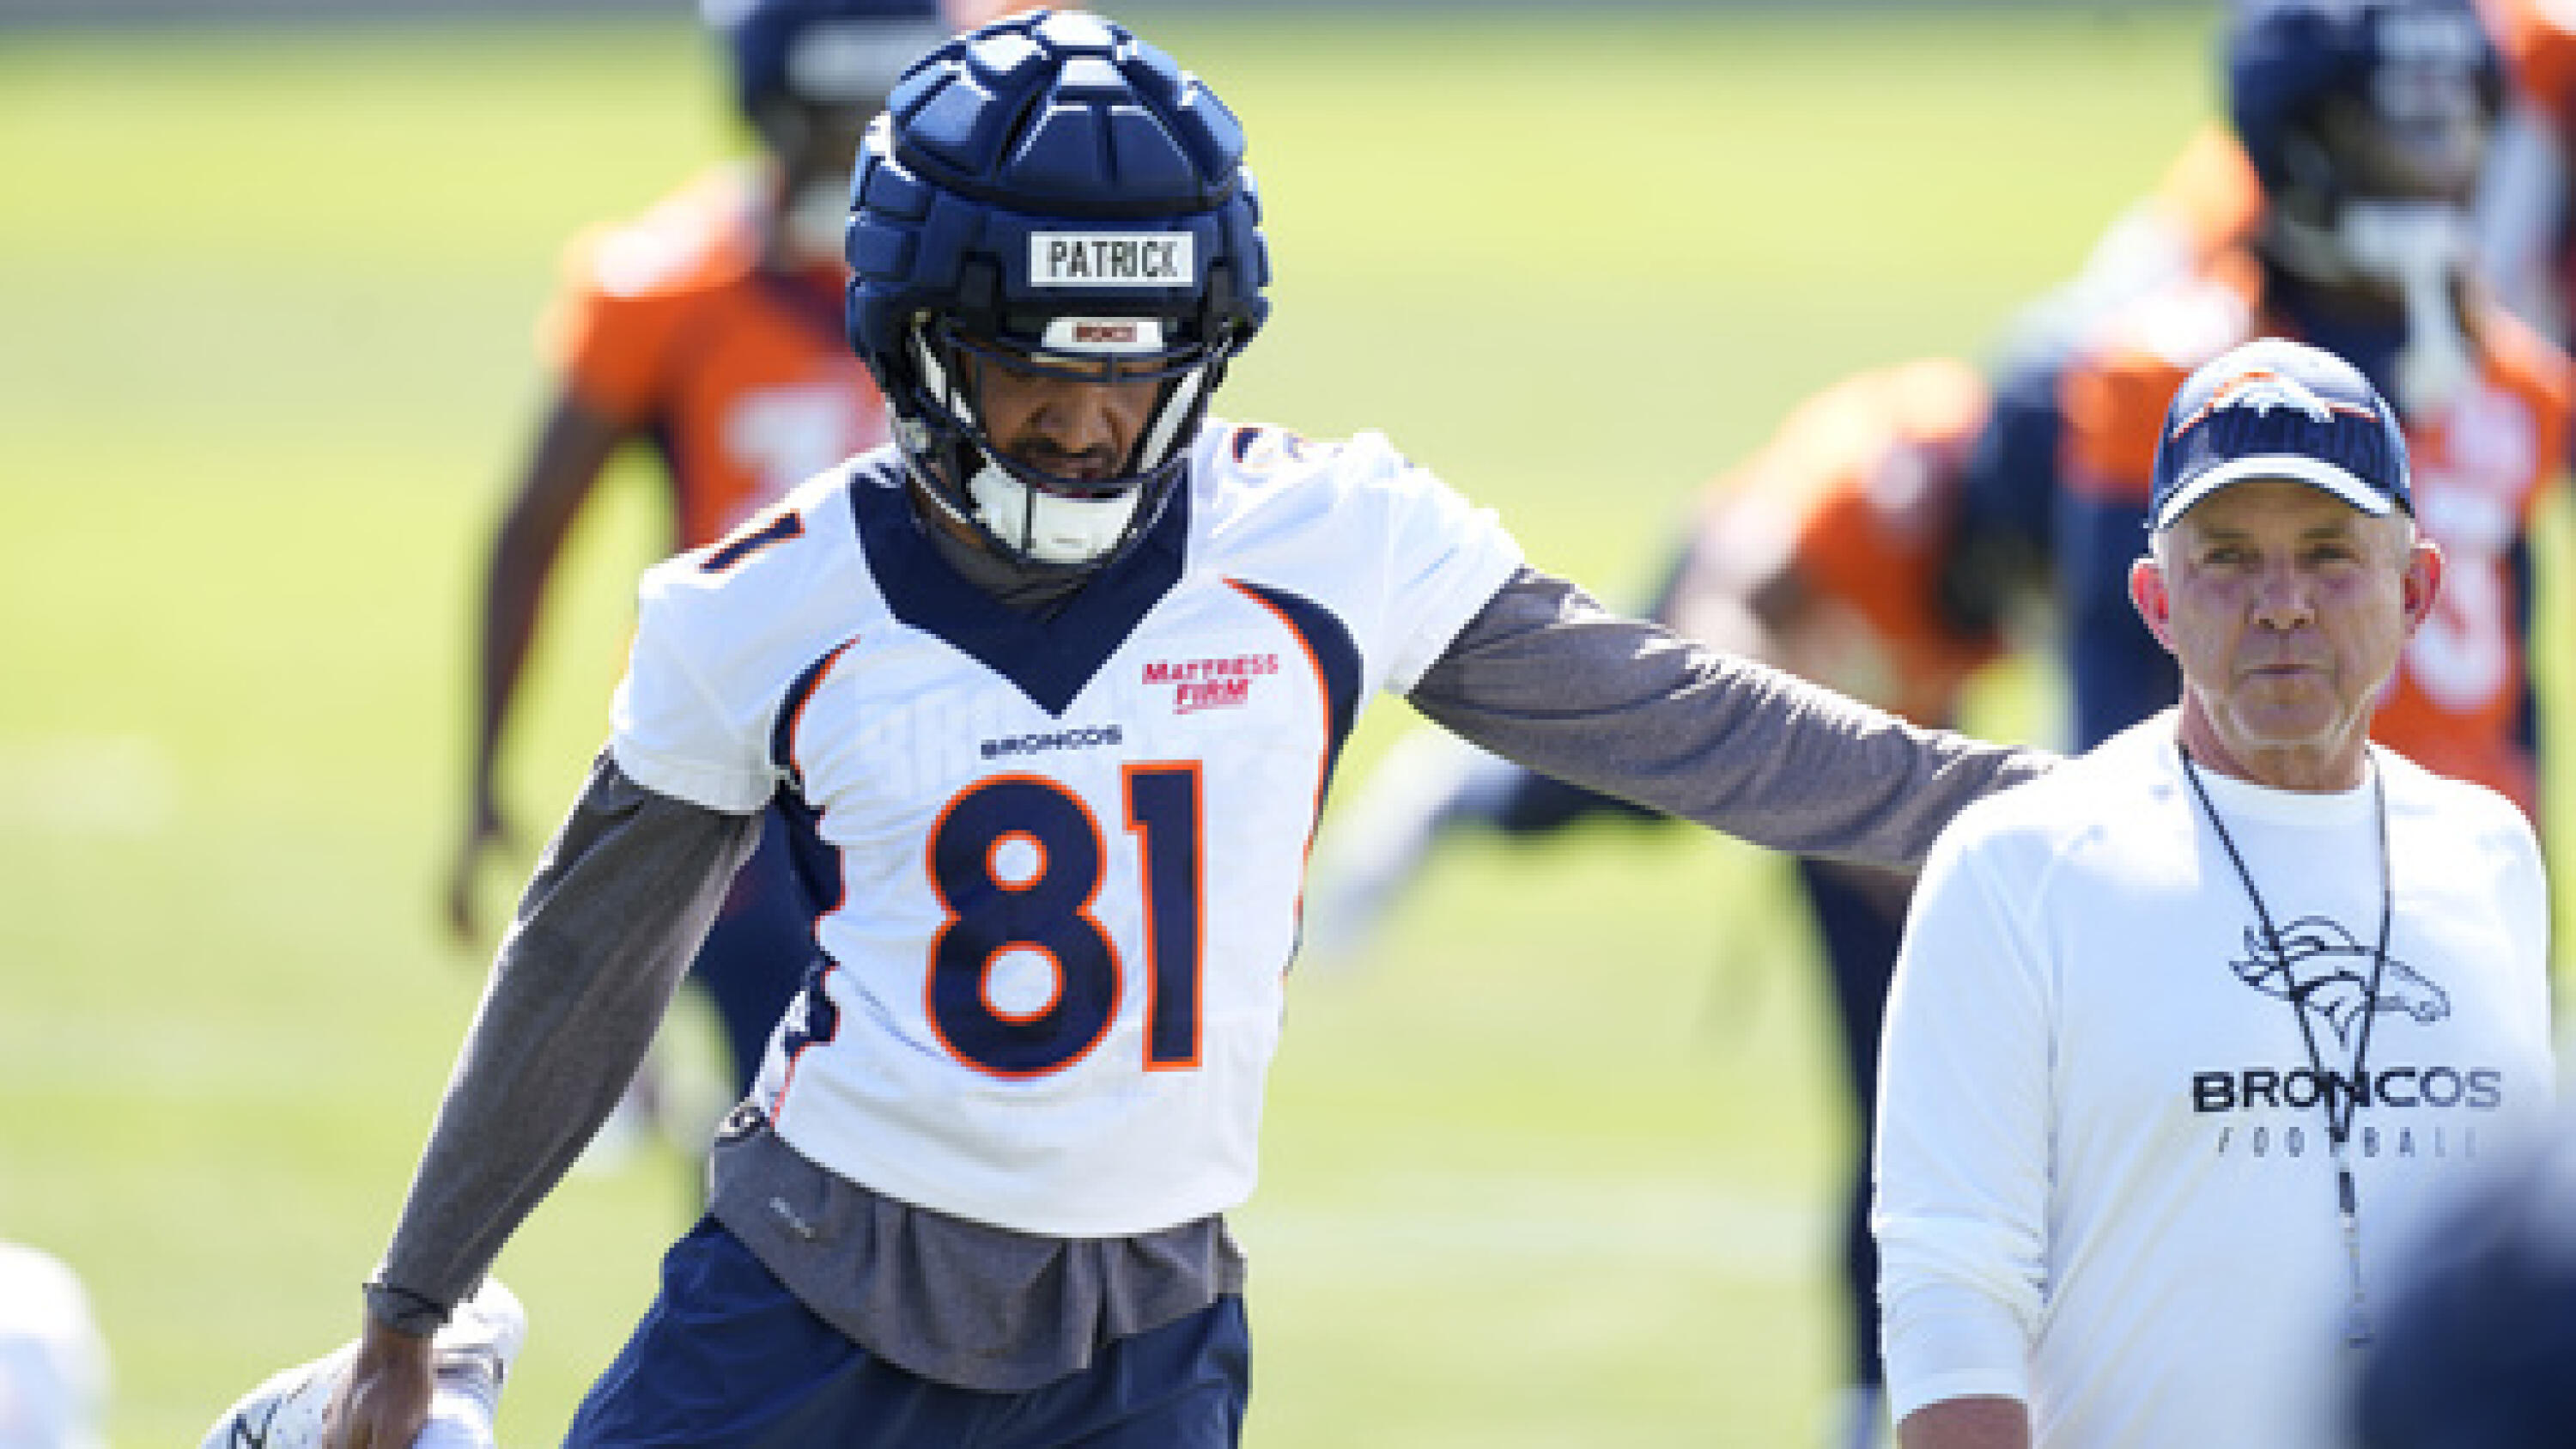 Broncos' deep receiving corps takes a big hit with the loss of Tim Patrick  and KJ Hamler – The Durango Herald